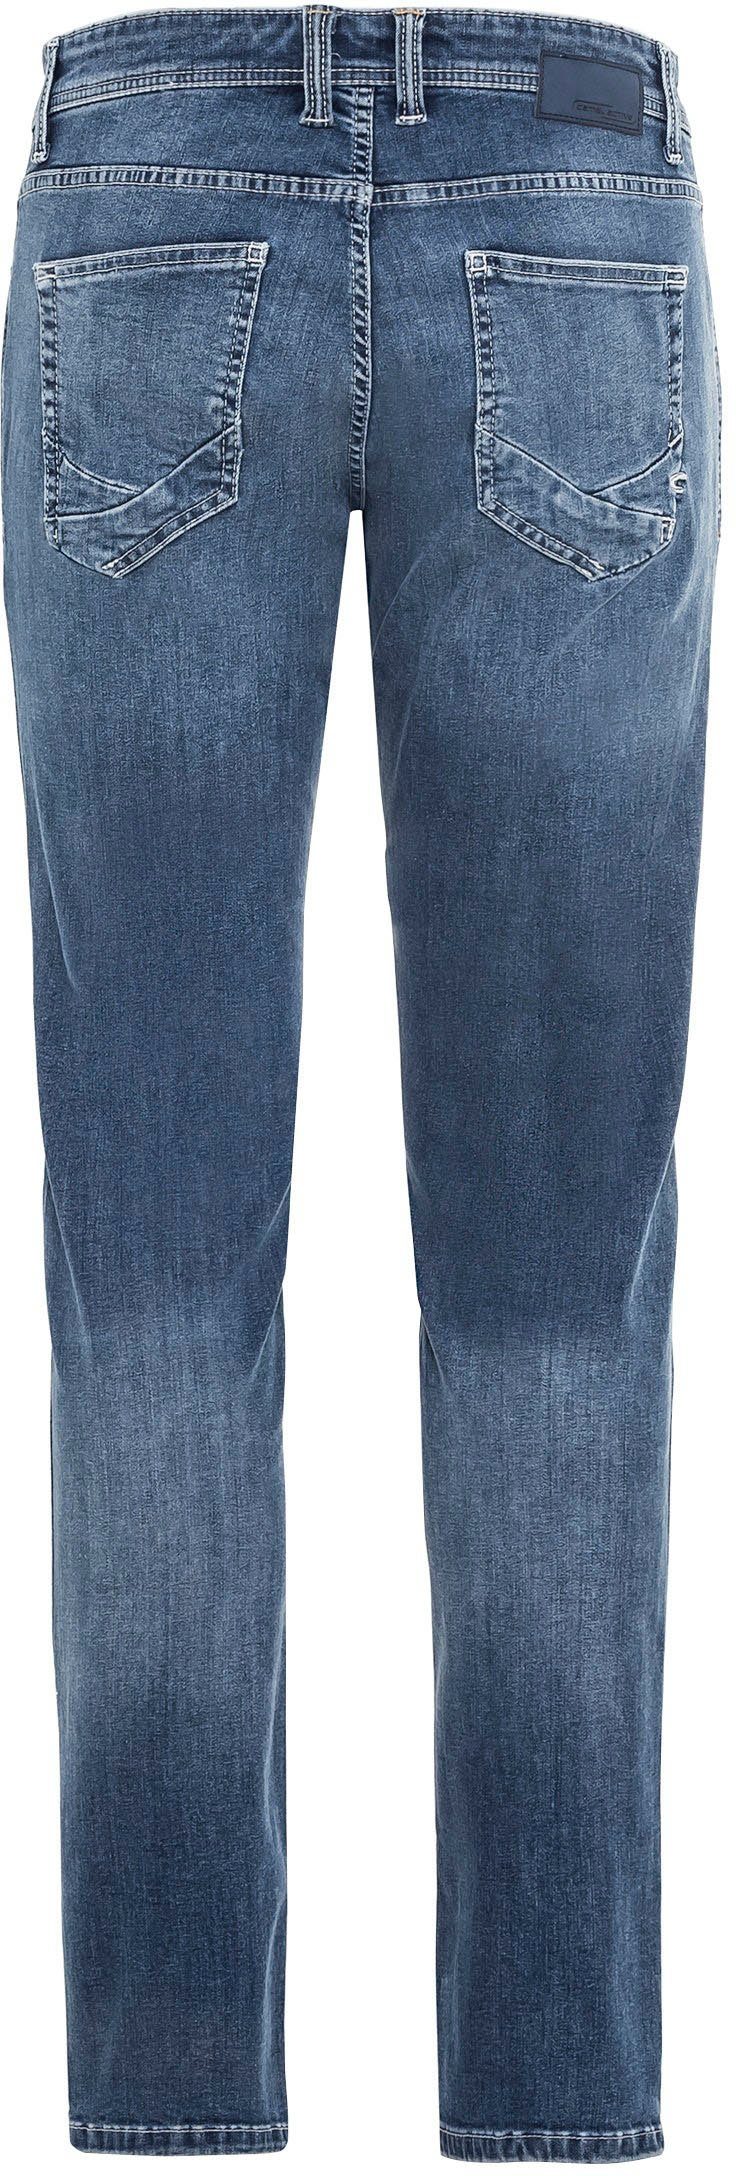 5-Pocket-Jeans mid leichter MADISON Used-Look active blue camel